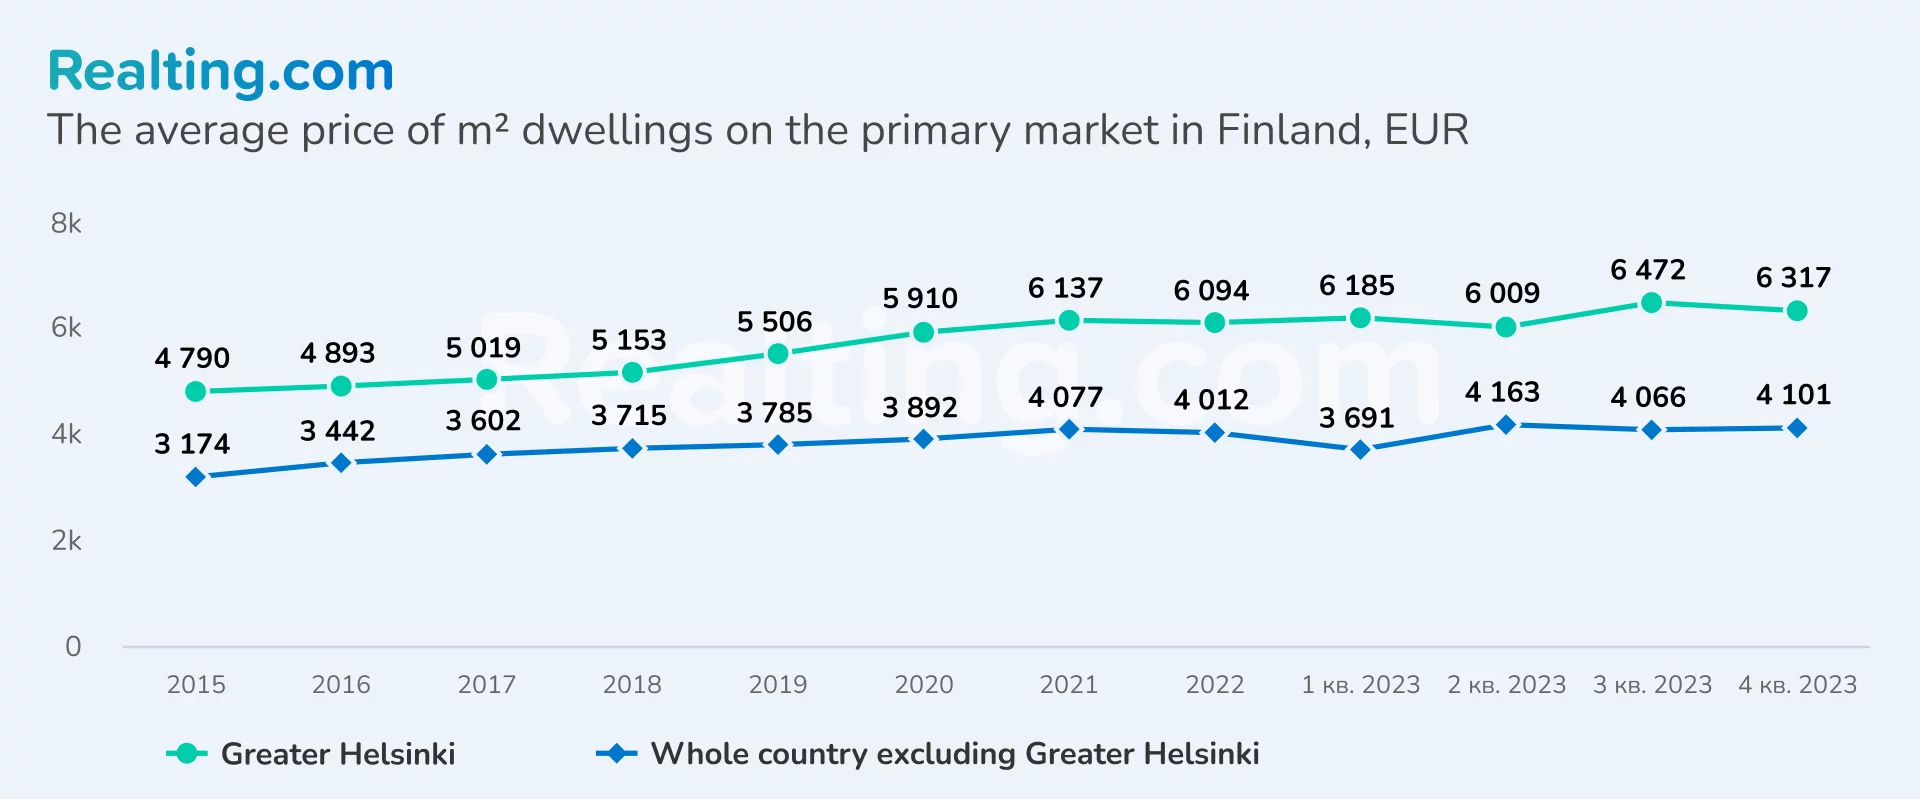 The average price of sq. m. dwellings on the primary market in Finland, EUR